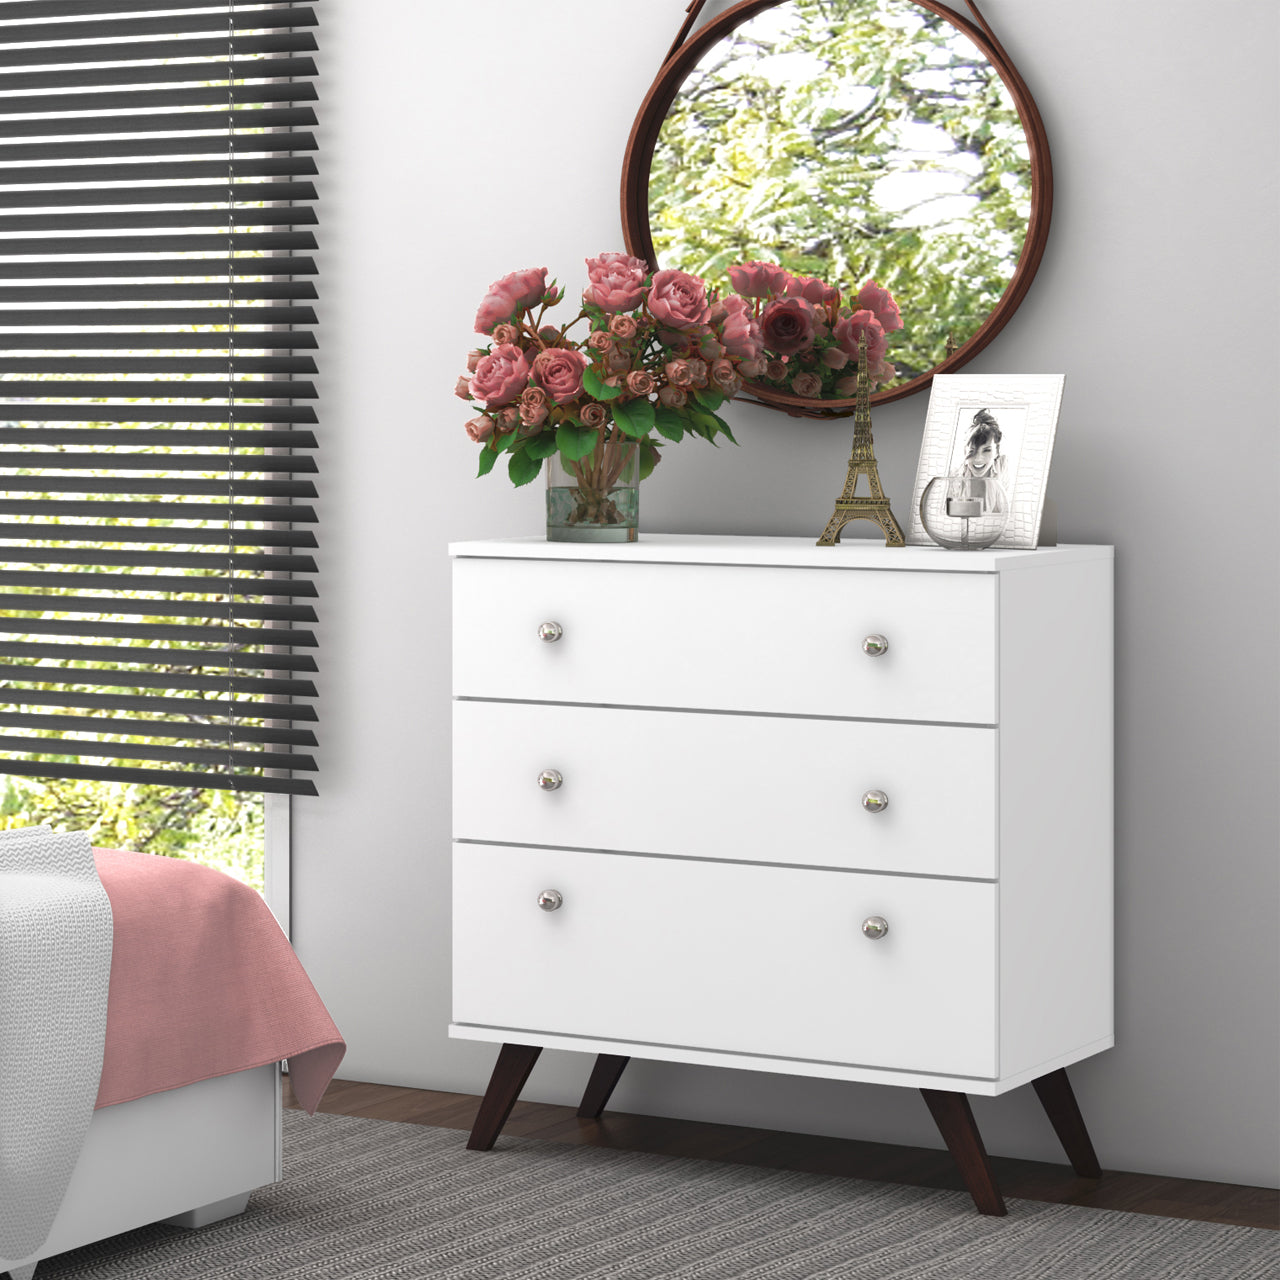 Urban Decor Exotic Designs Chest Of Drawers MWBR3018A